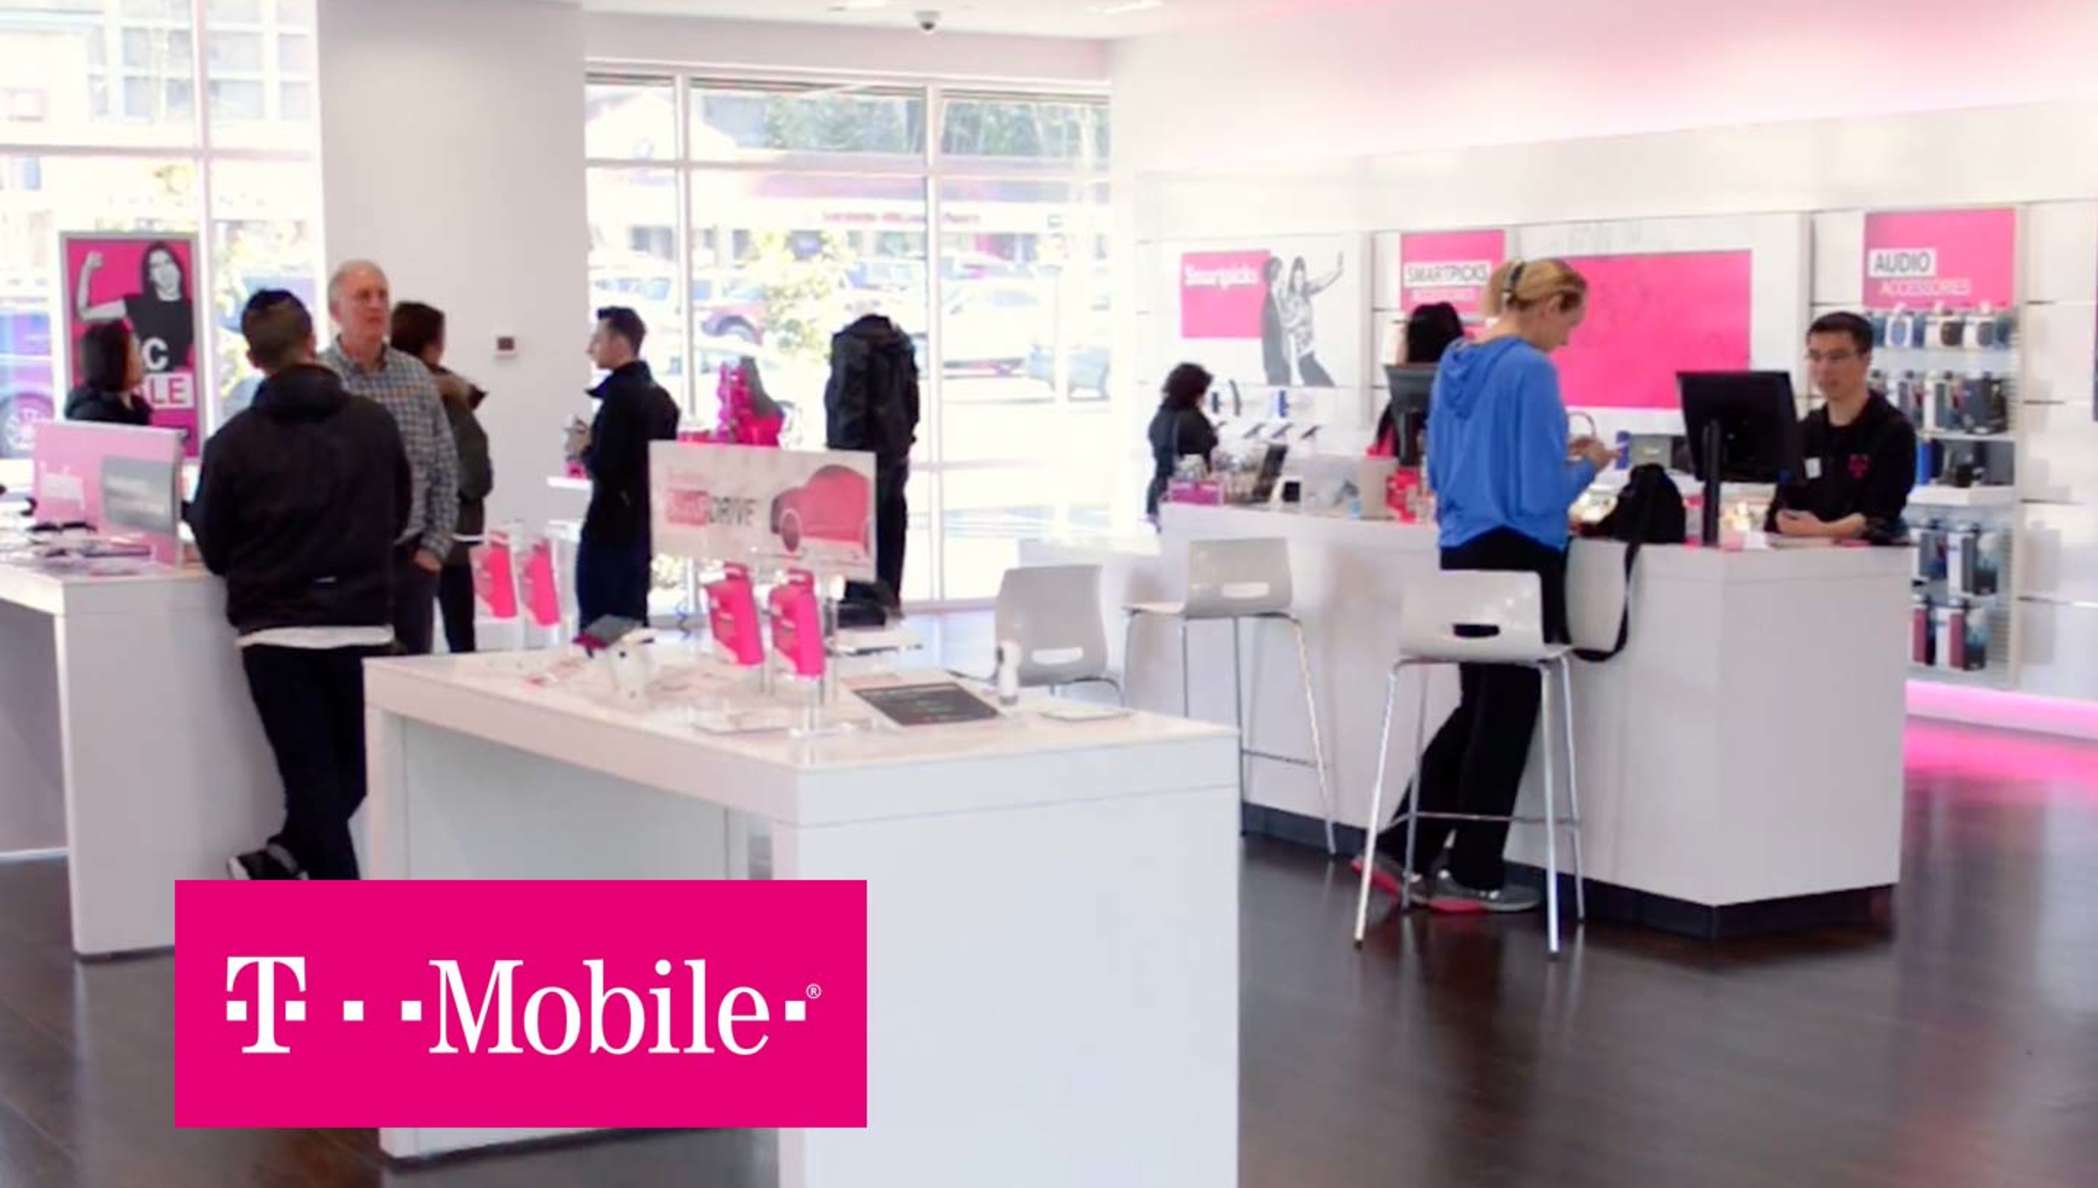 A T-mobile storefront with employees helping customers.